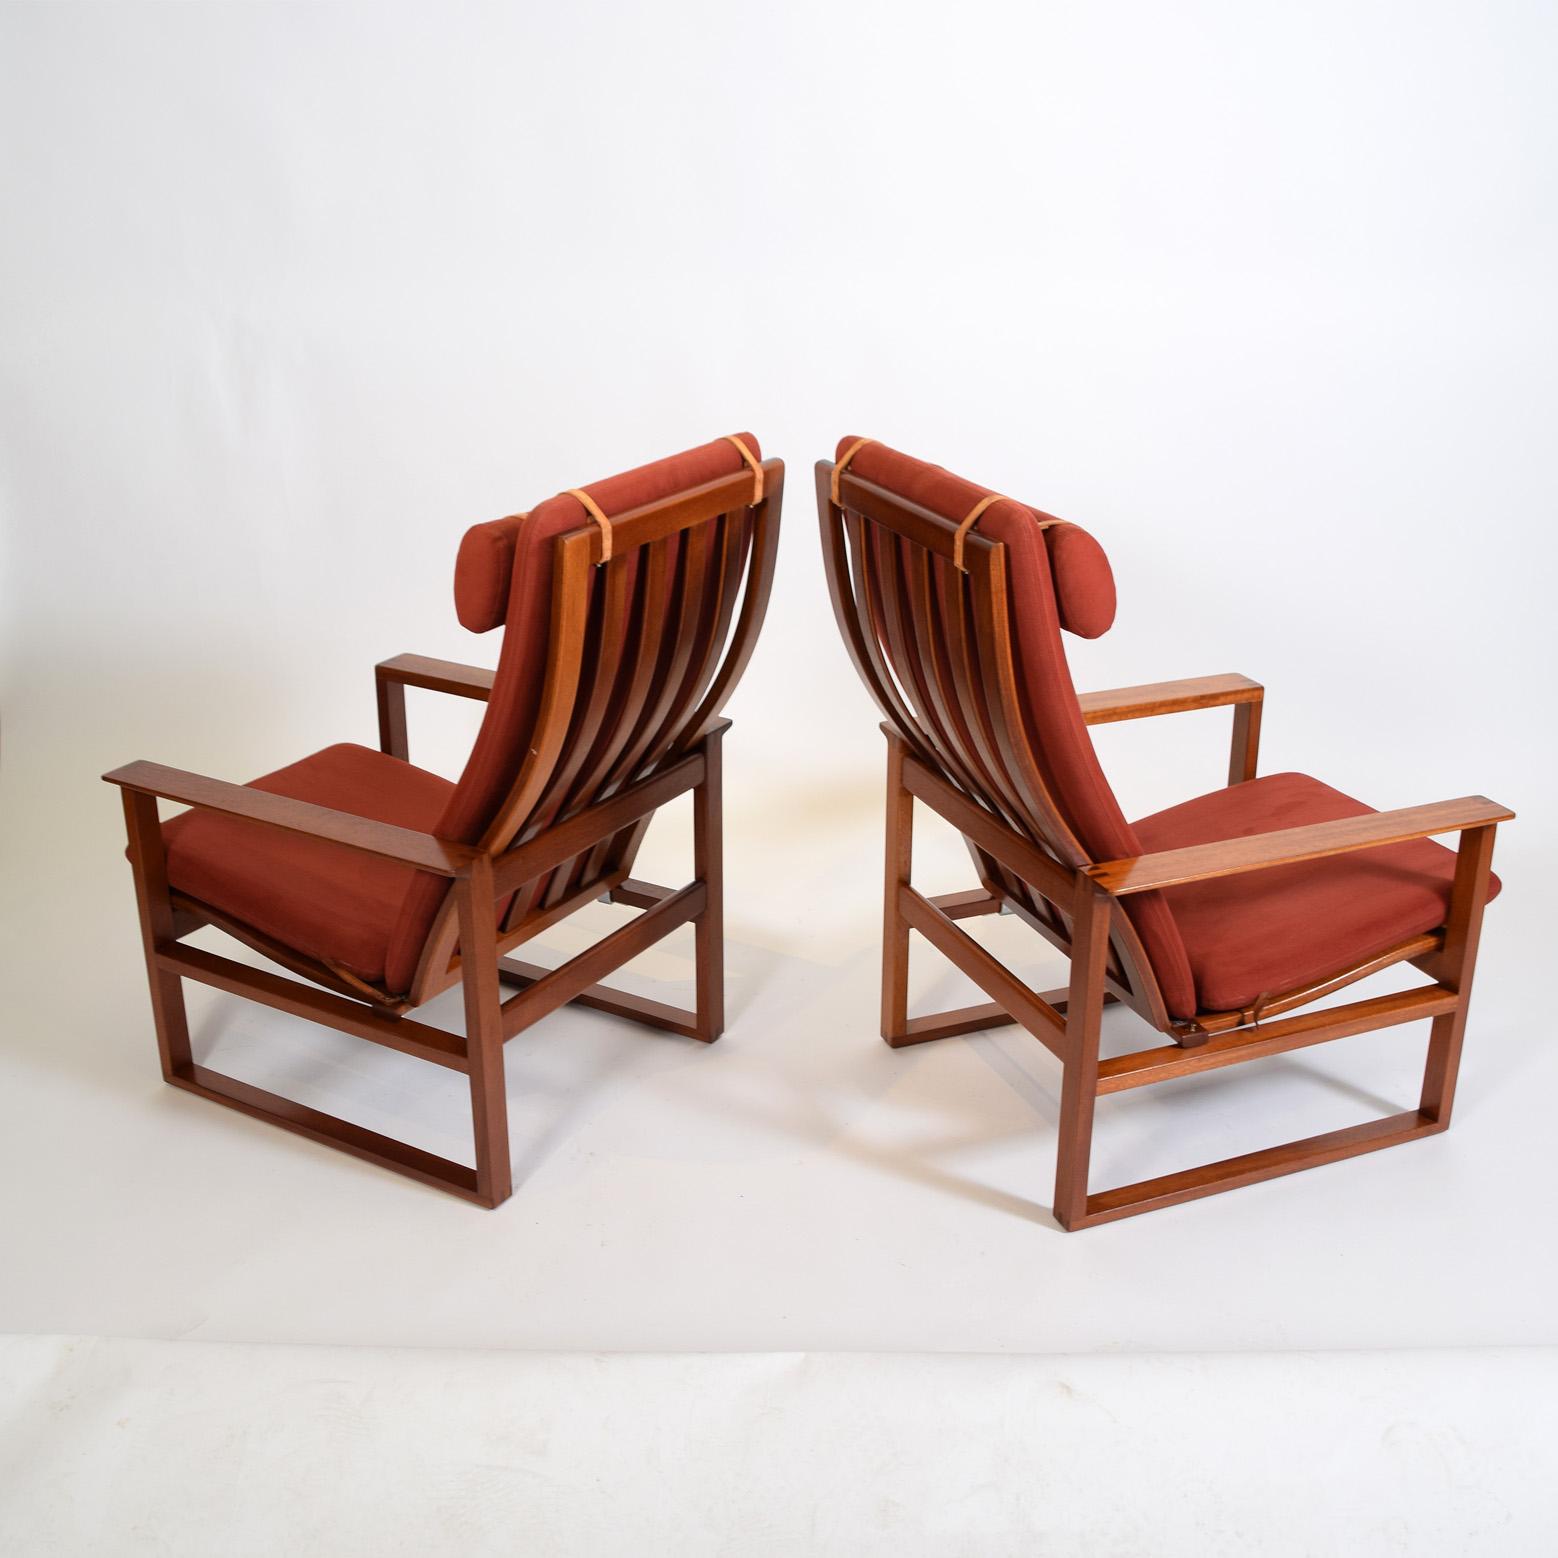 Børge Mogensen, Model 2254 Lounge Chairs, 1956 In Good Condition For Sale In Hudson, NY